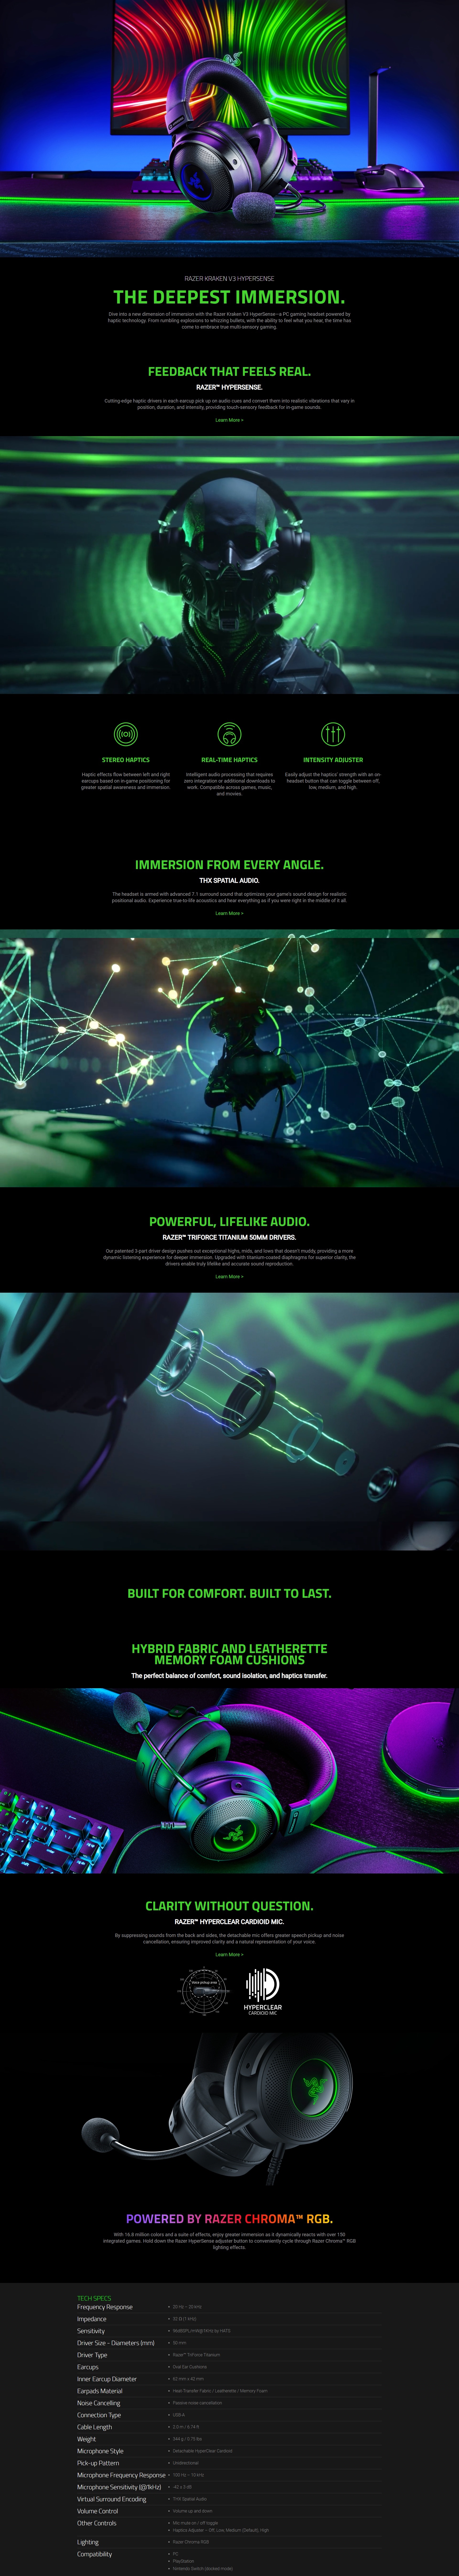 A large marketing image providing additional information about the product Razer Kraken V3 HyperSense Wired USB Gaming Headset with Haptic Technology - Additional alt info not provided